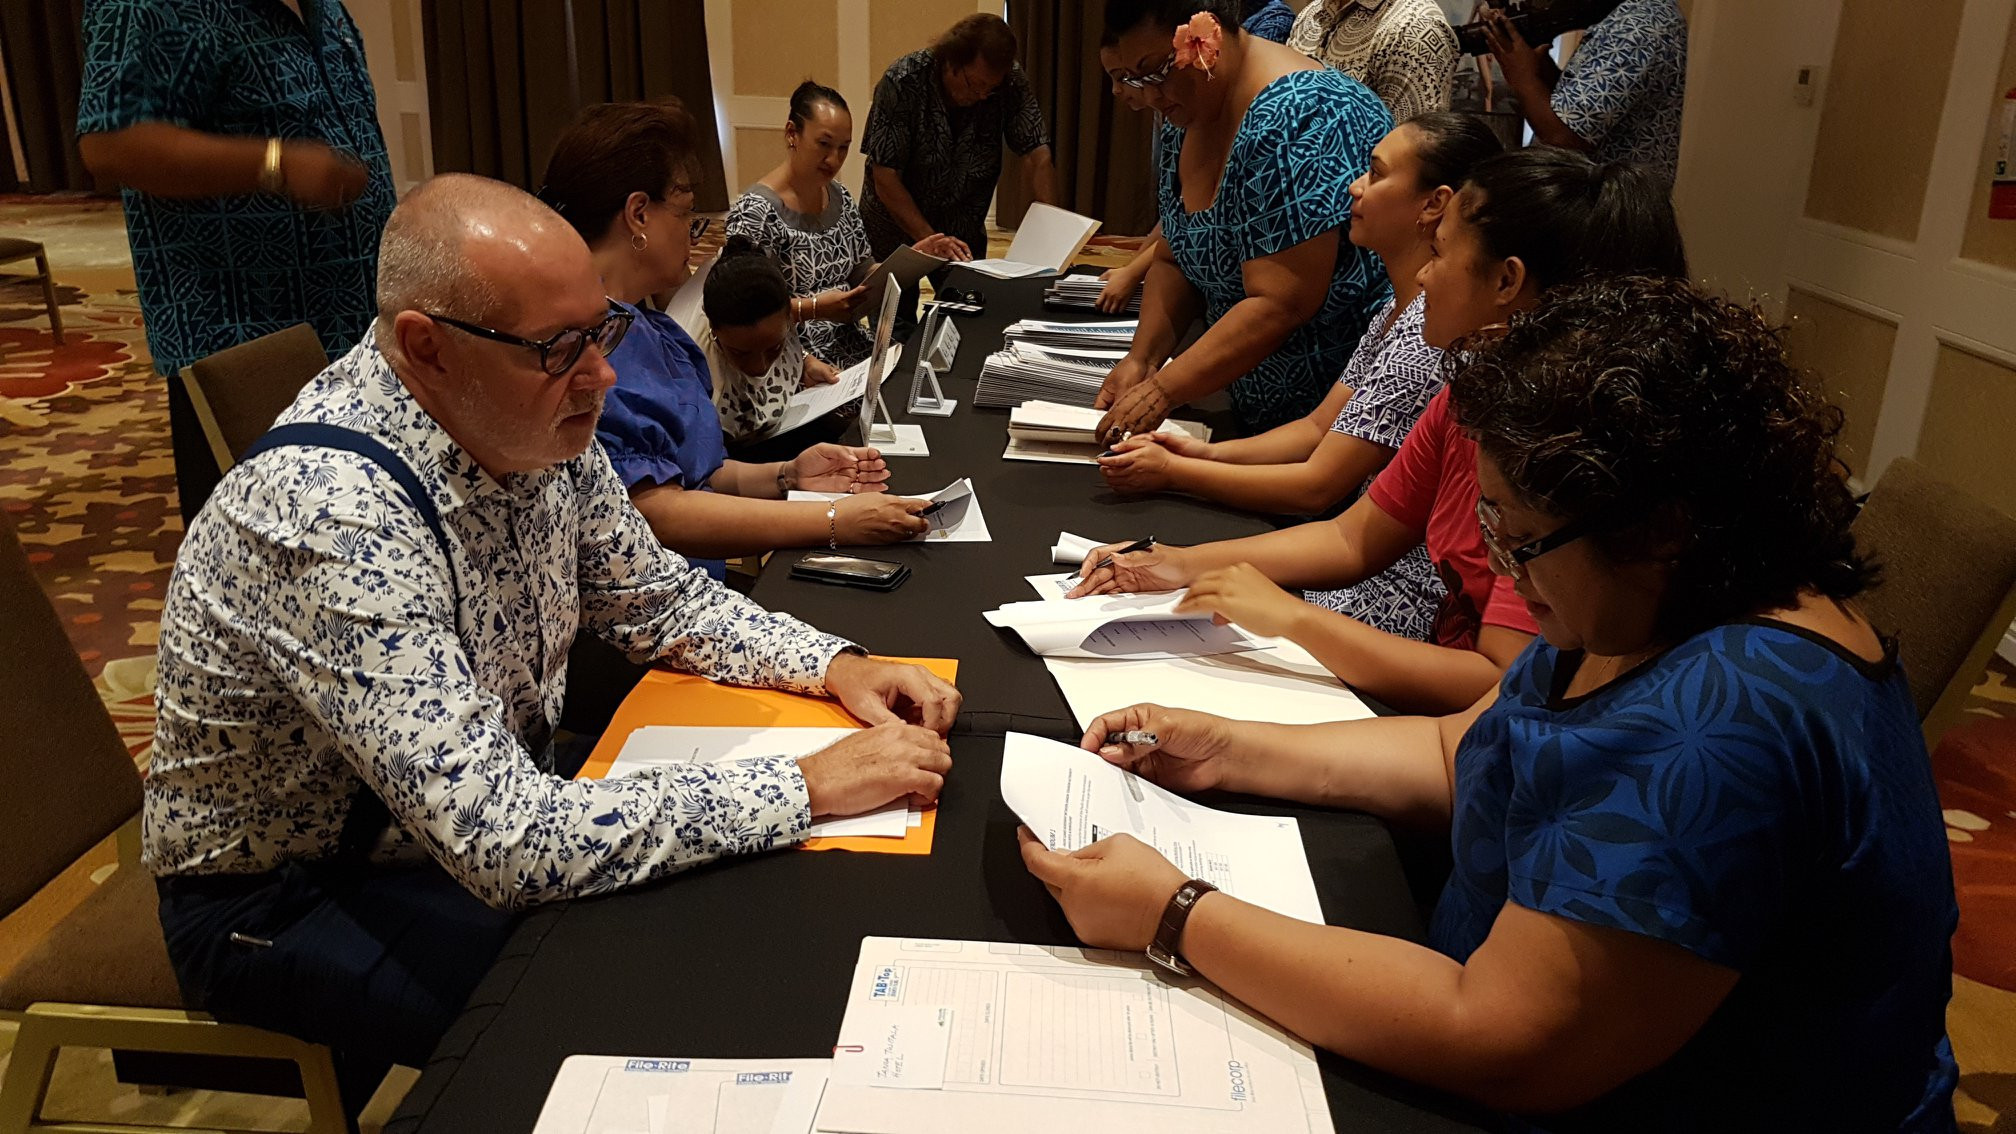 The event to mark the signing of the Memorandum of Agreement to ensure there is enough accommodation available in Samoa for next year's Pacific Games was well attended ©Samoa 2019 Pacific Games/Facebook